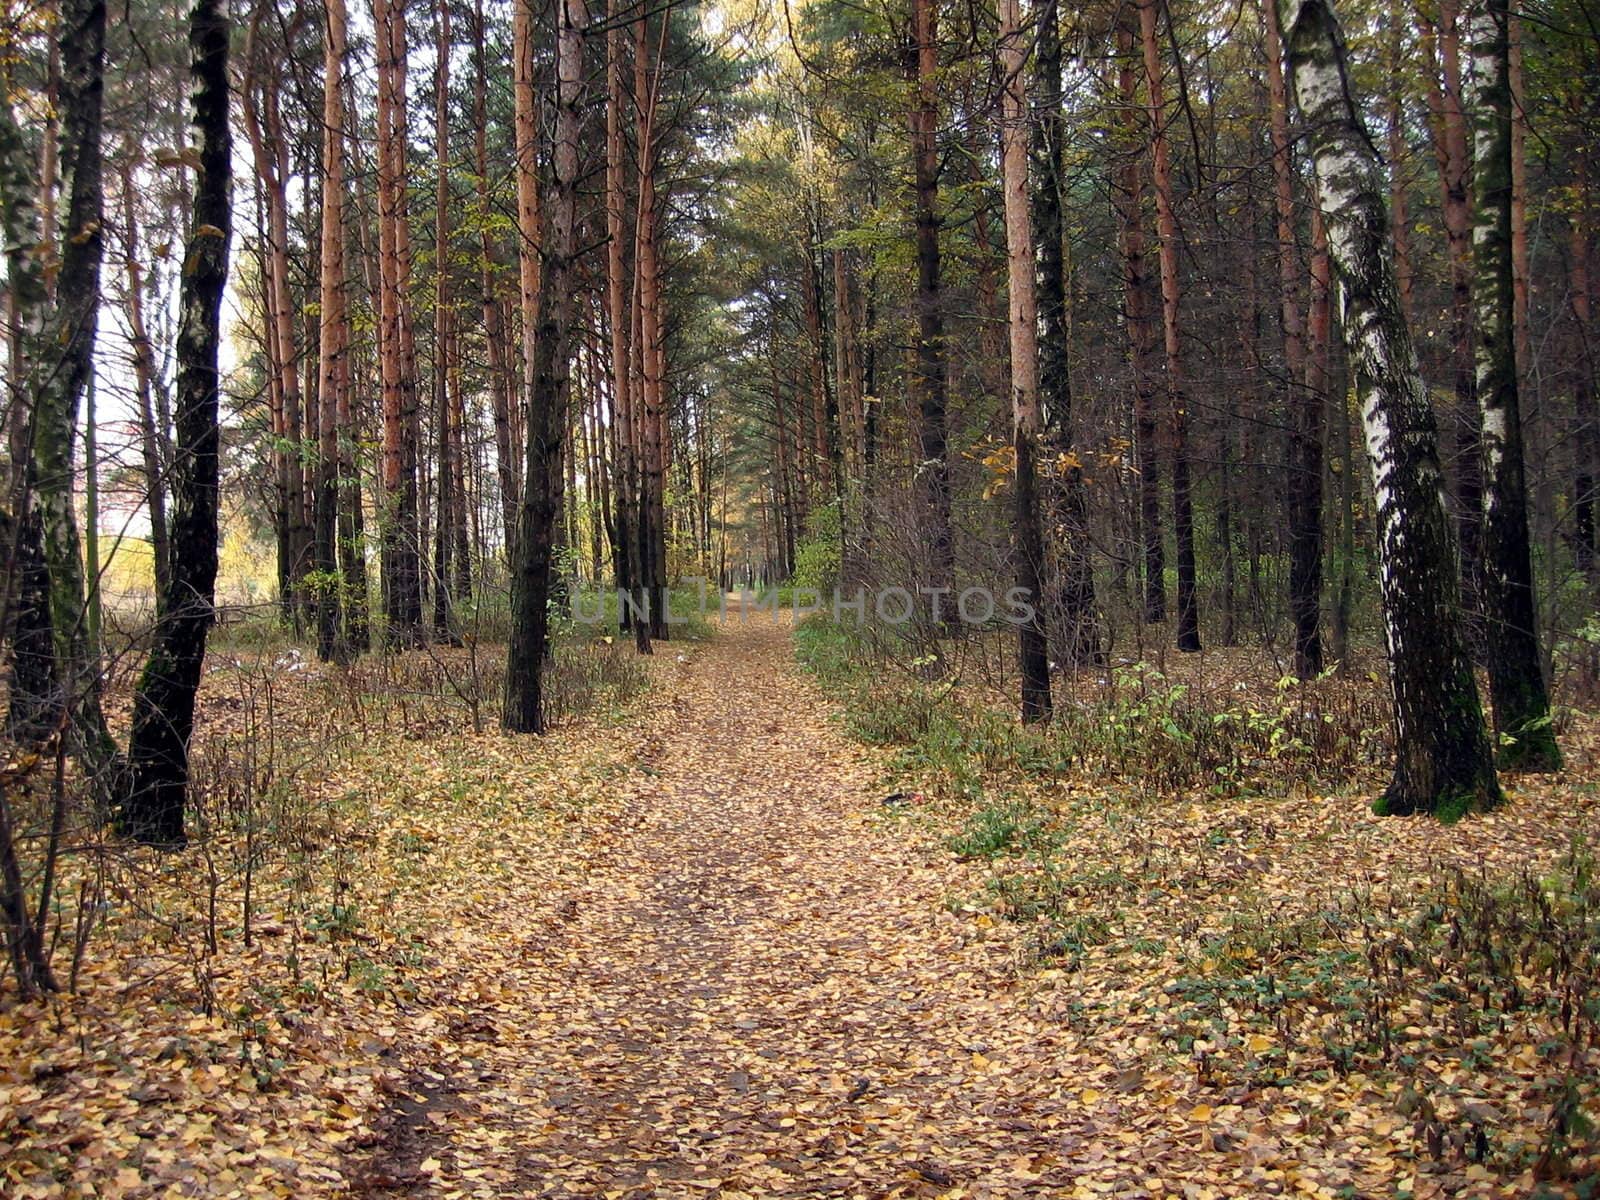 Autumn dry leaves on the ground in the forest